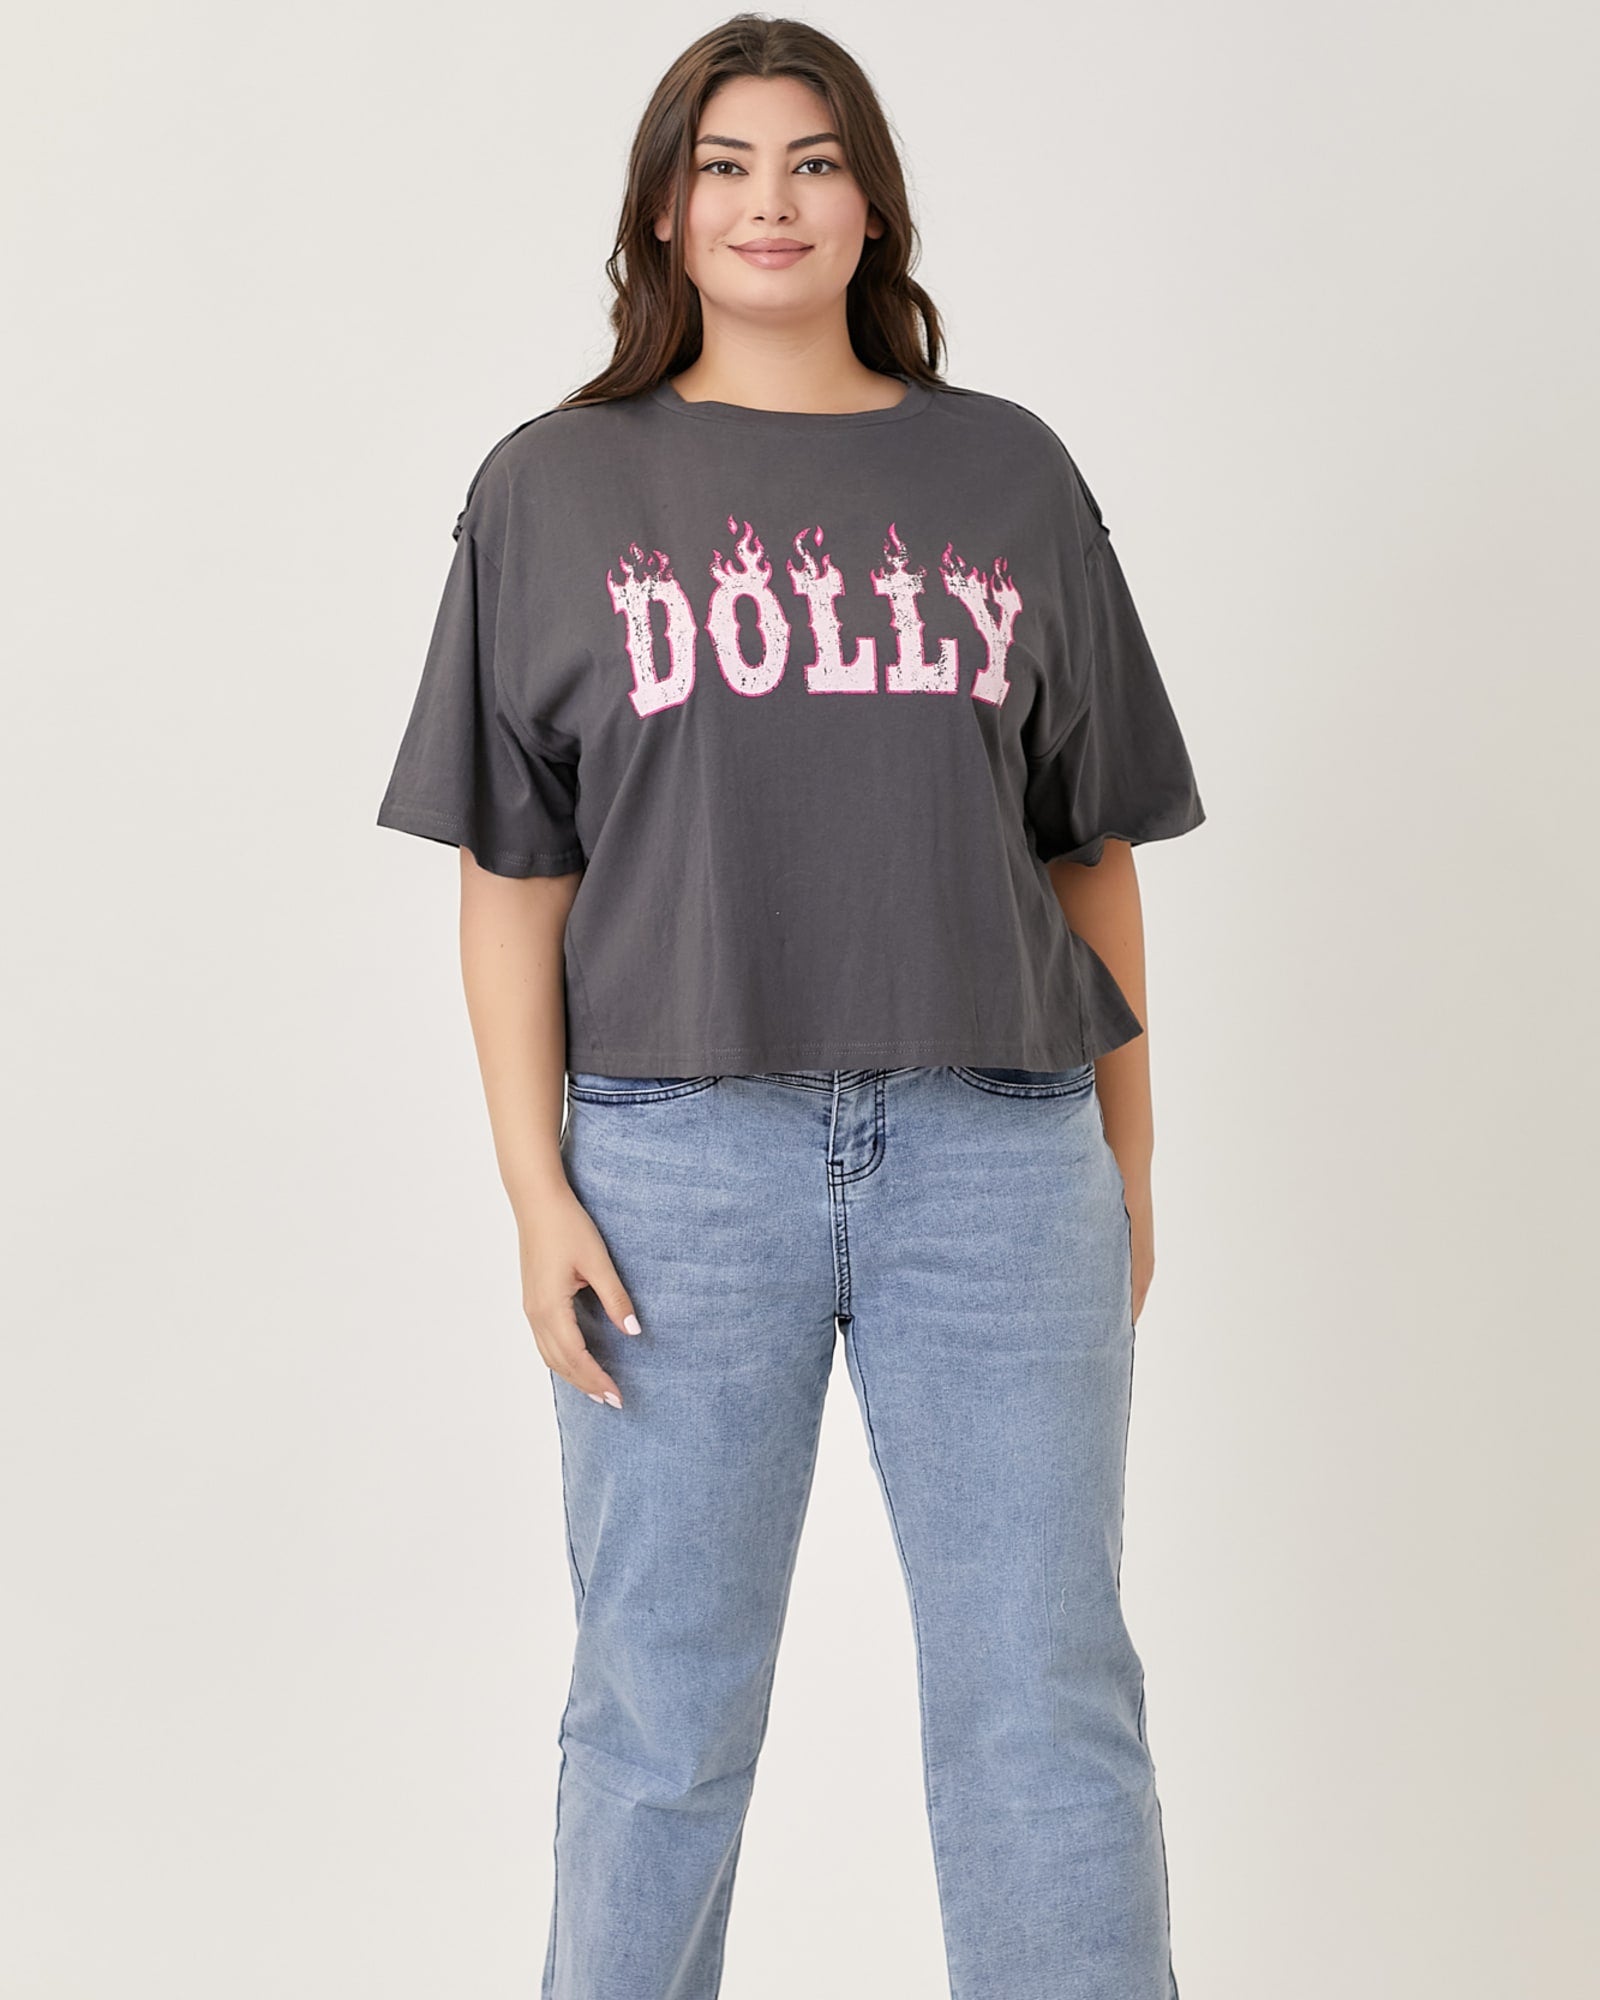 Dolly Graphic Tee | CHARCOAL